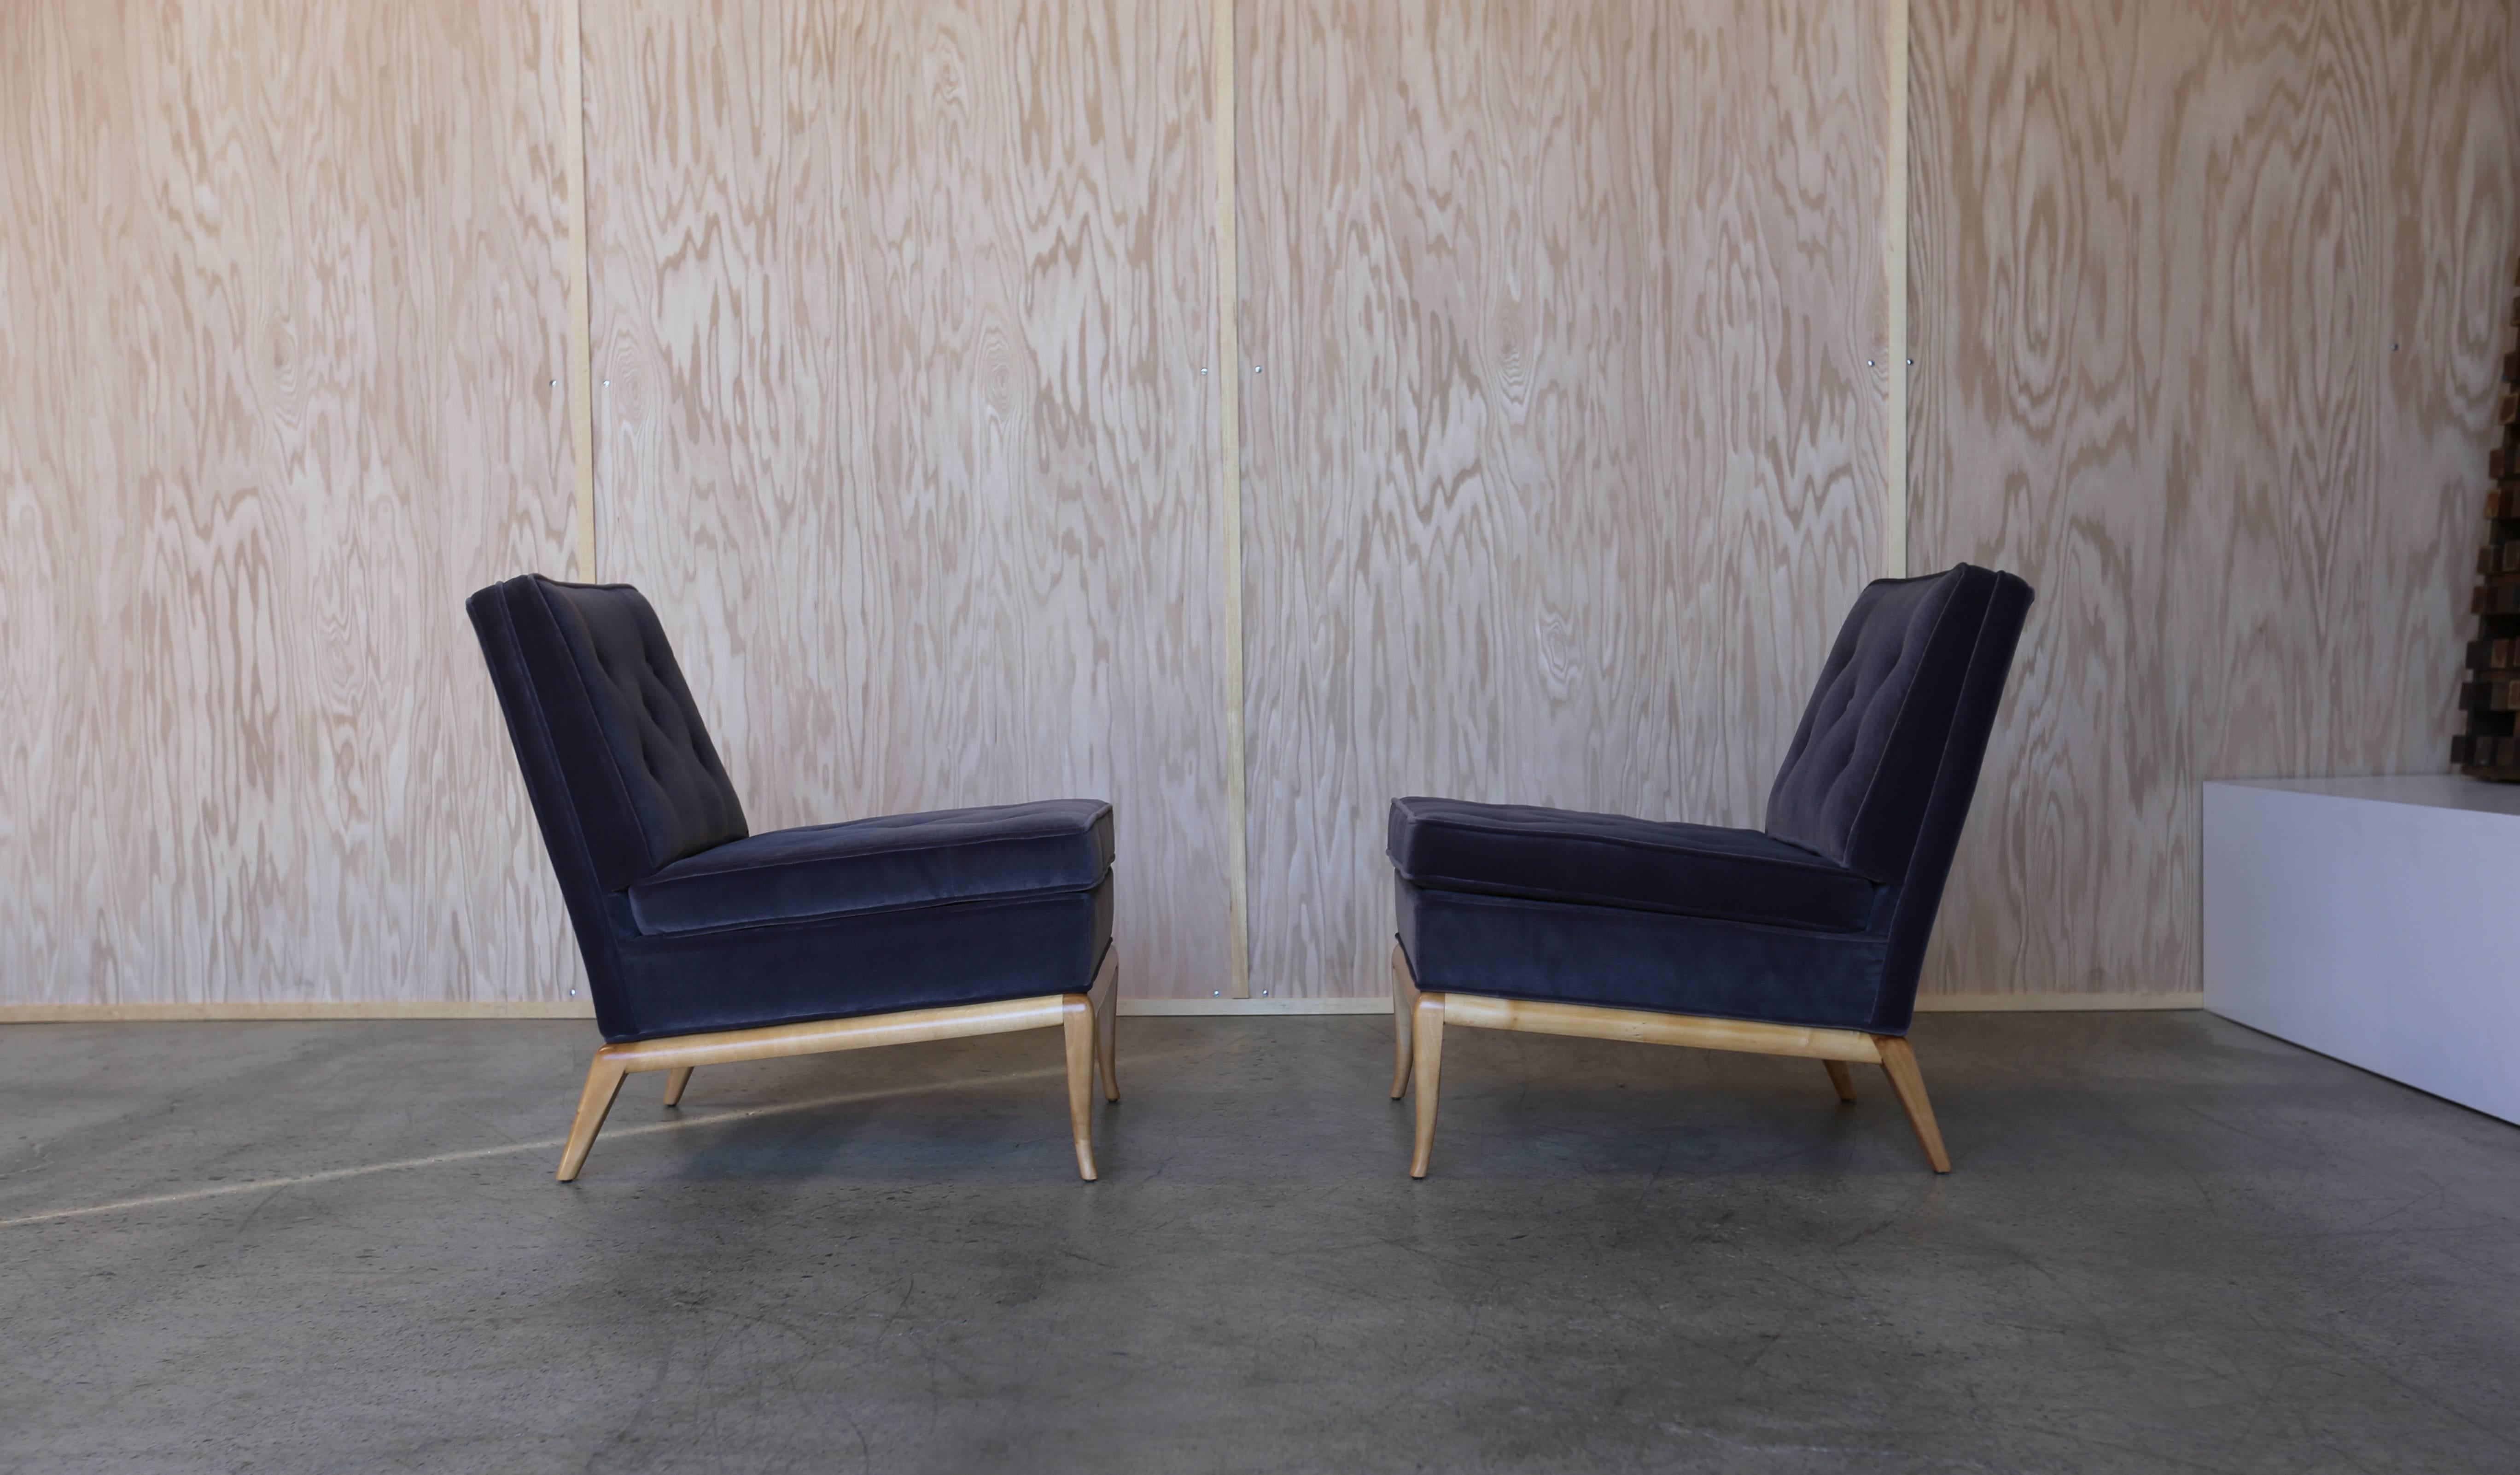 Pair of Slipper Lounge Chairs by T.H. Robsjohn Gibbings. This pair has been upholstered in a charcoal velvet.